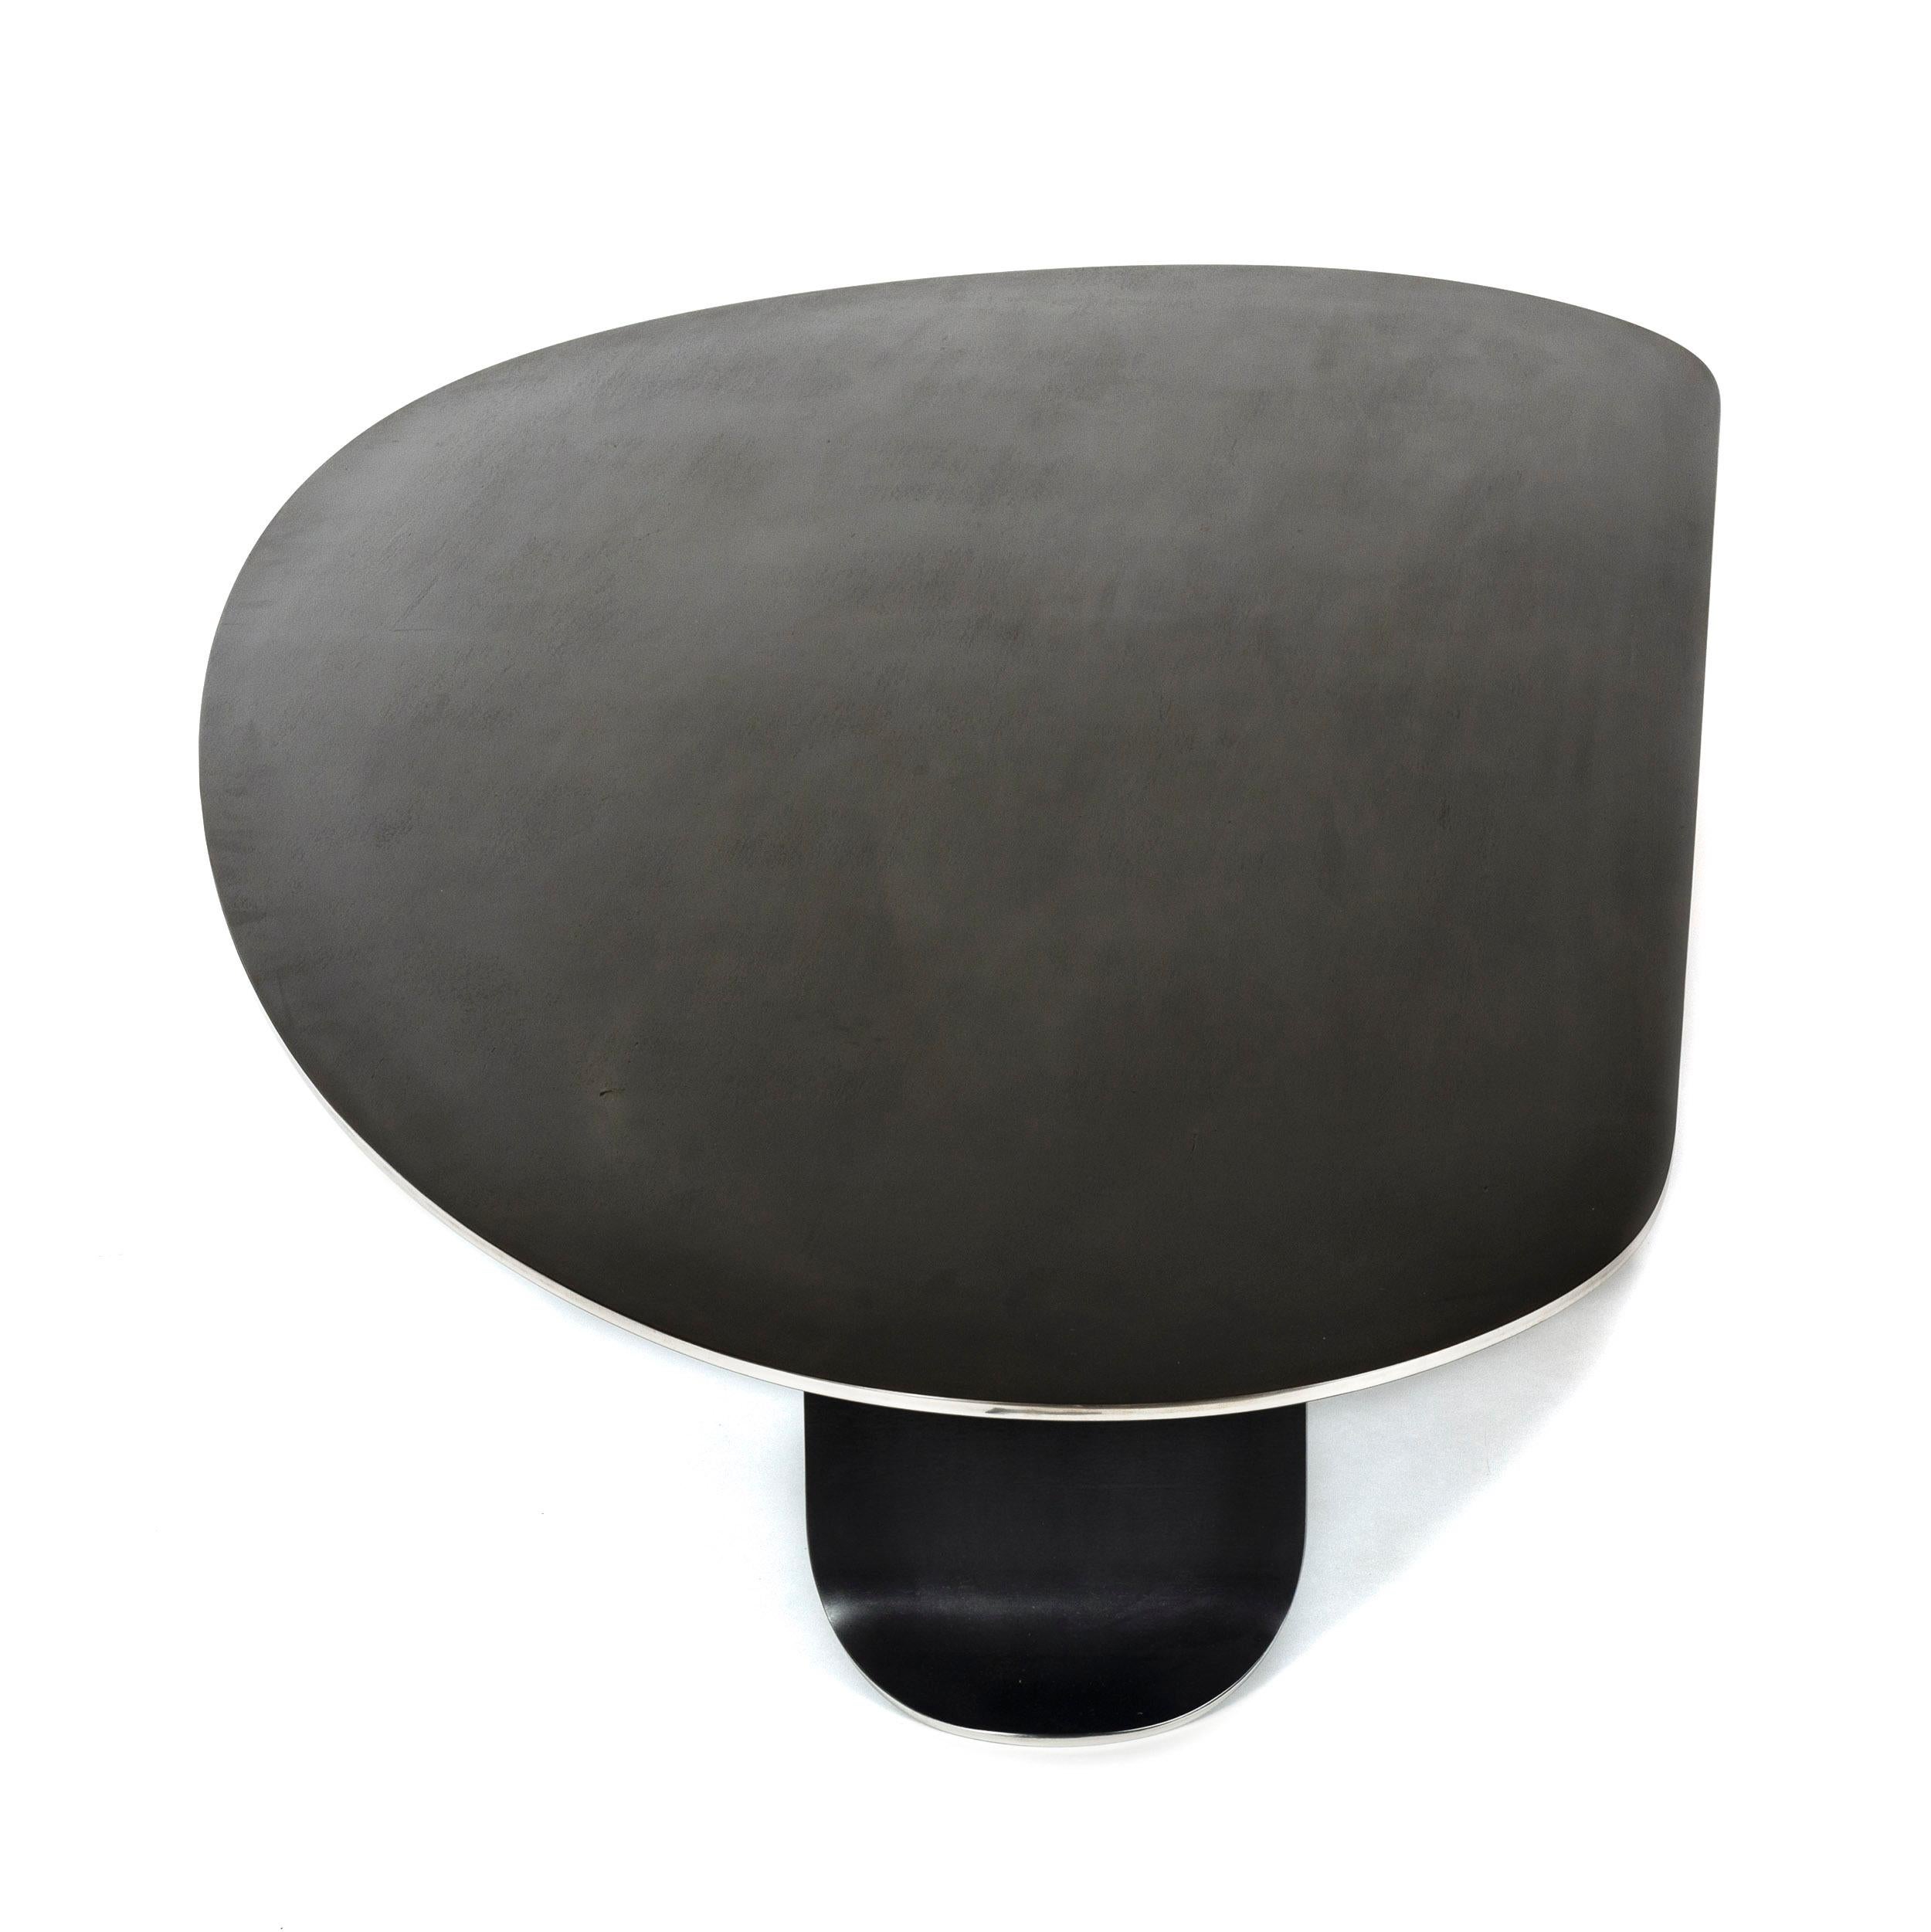 Contemporary Wyeth Chrysalis Table No. 1 in Blackened Stainless Steel with Polished Edges For Sale